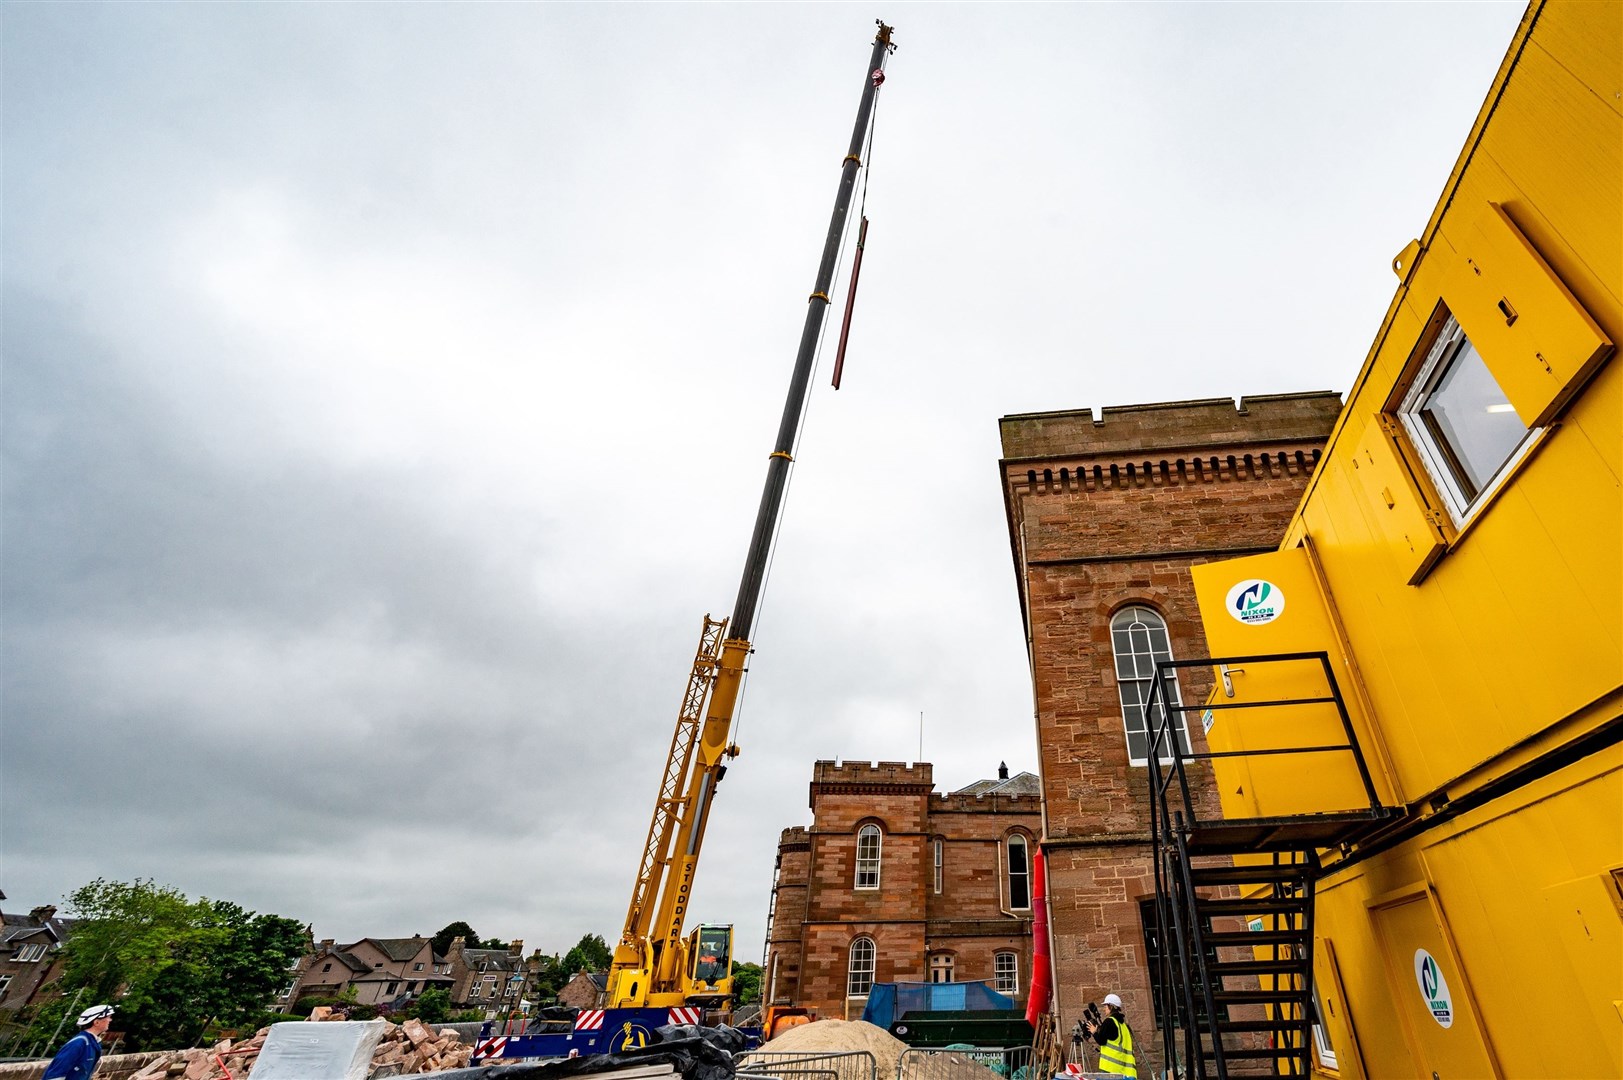 The first deployement of a crane at Inverness Castle as the new visitor experience takes shape.